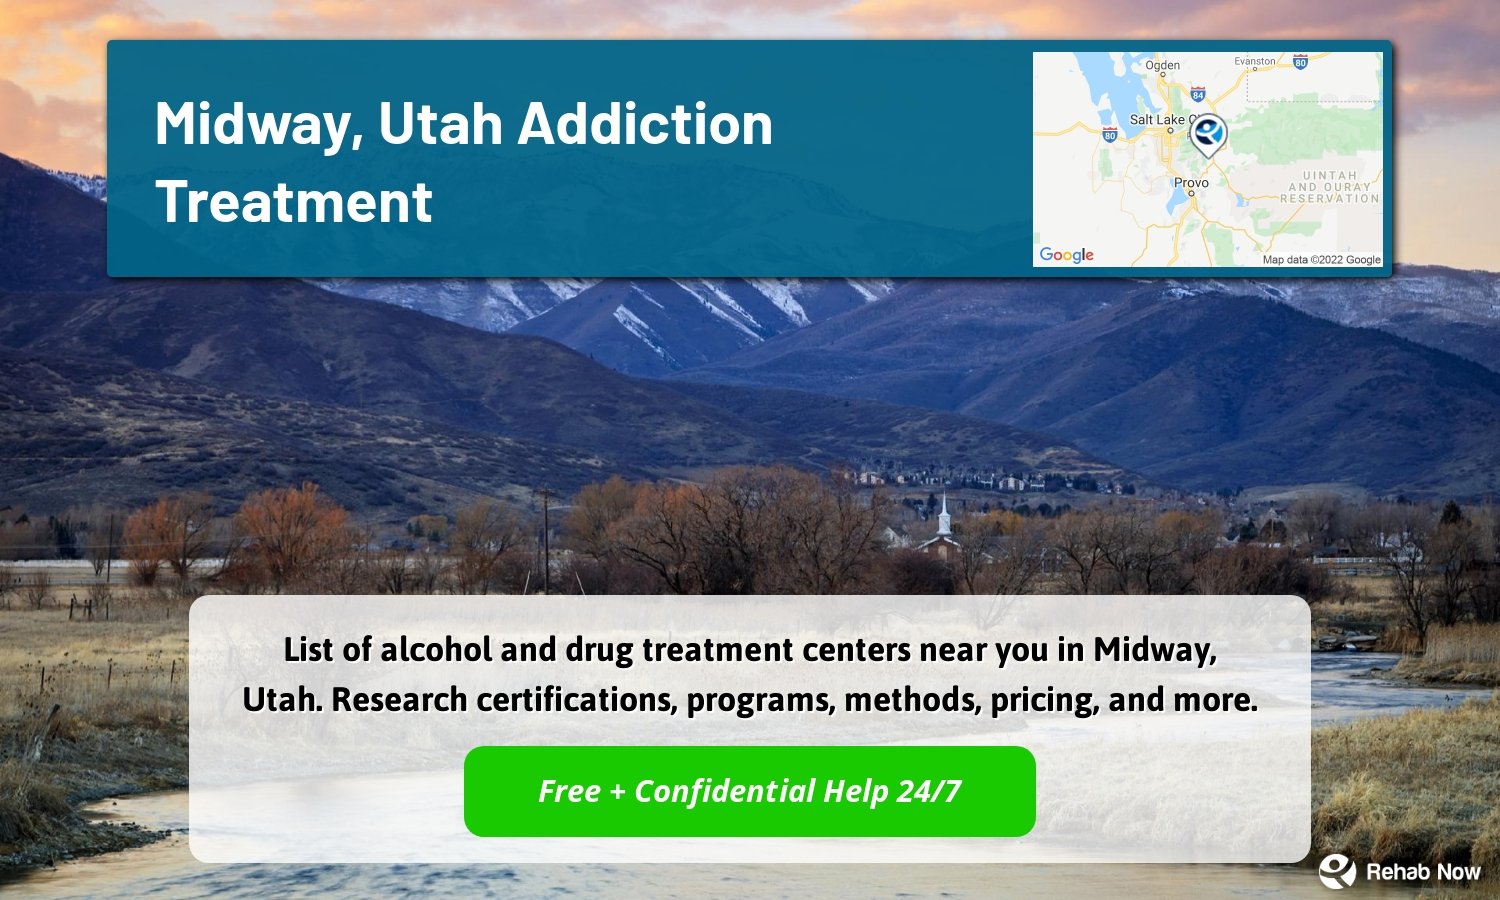 List of alcohol and drug treatment centers near you in Midway, Utah. Research certifications, programs, methods, pricing, and more.